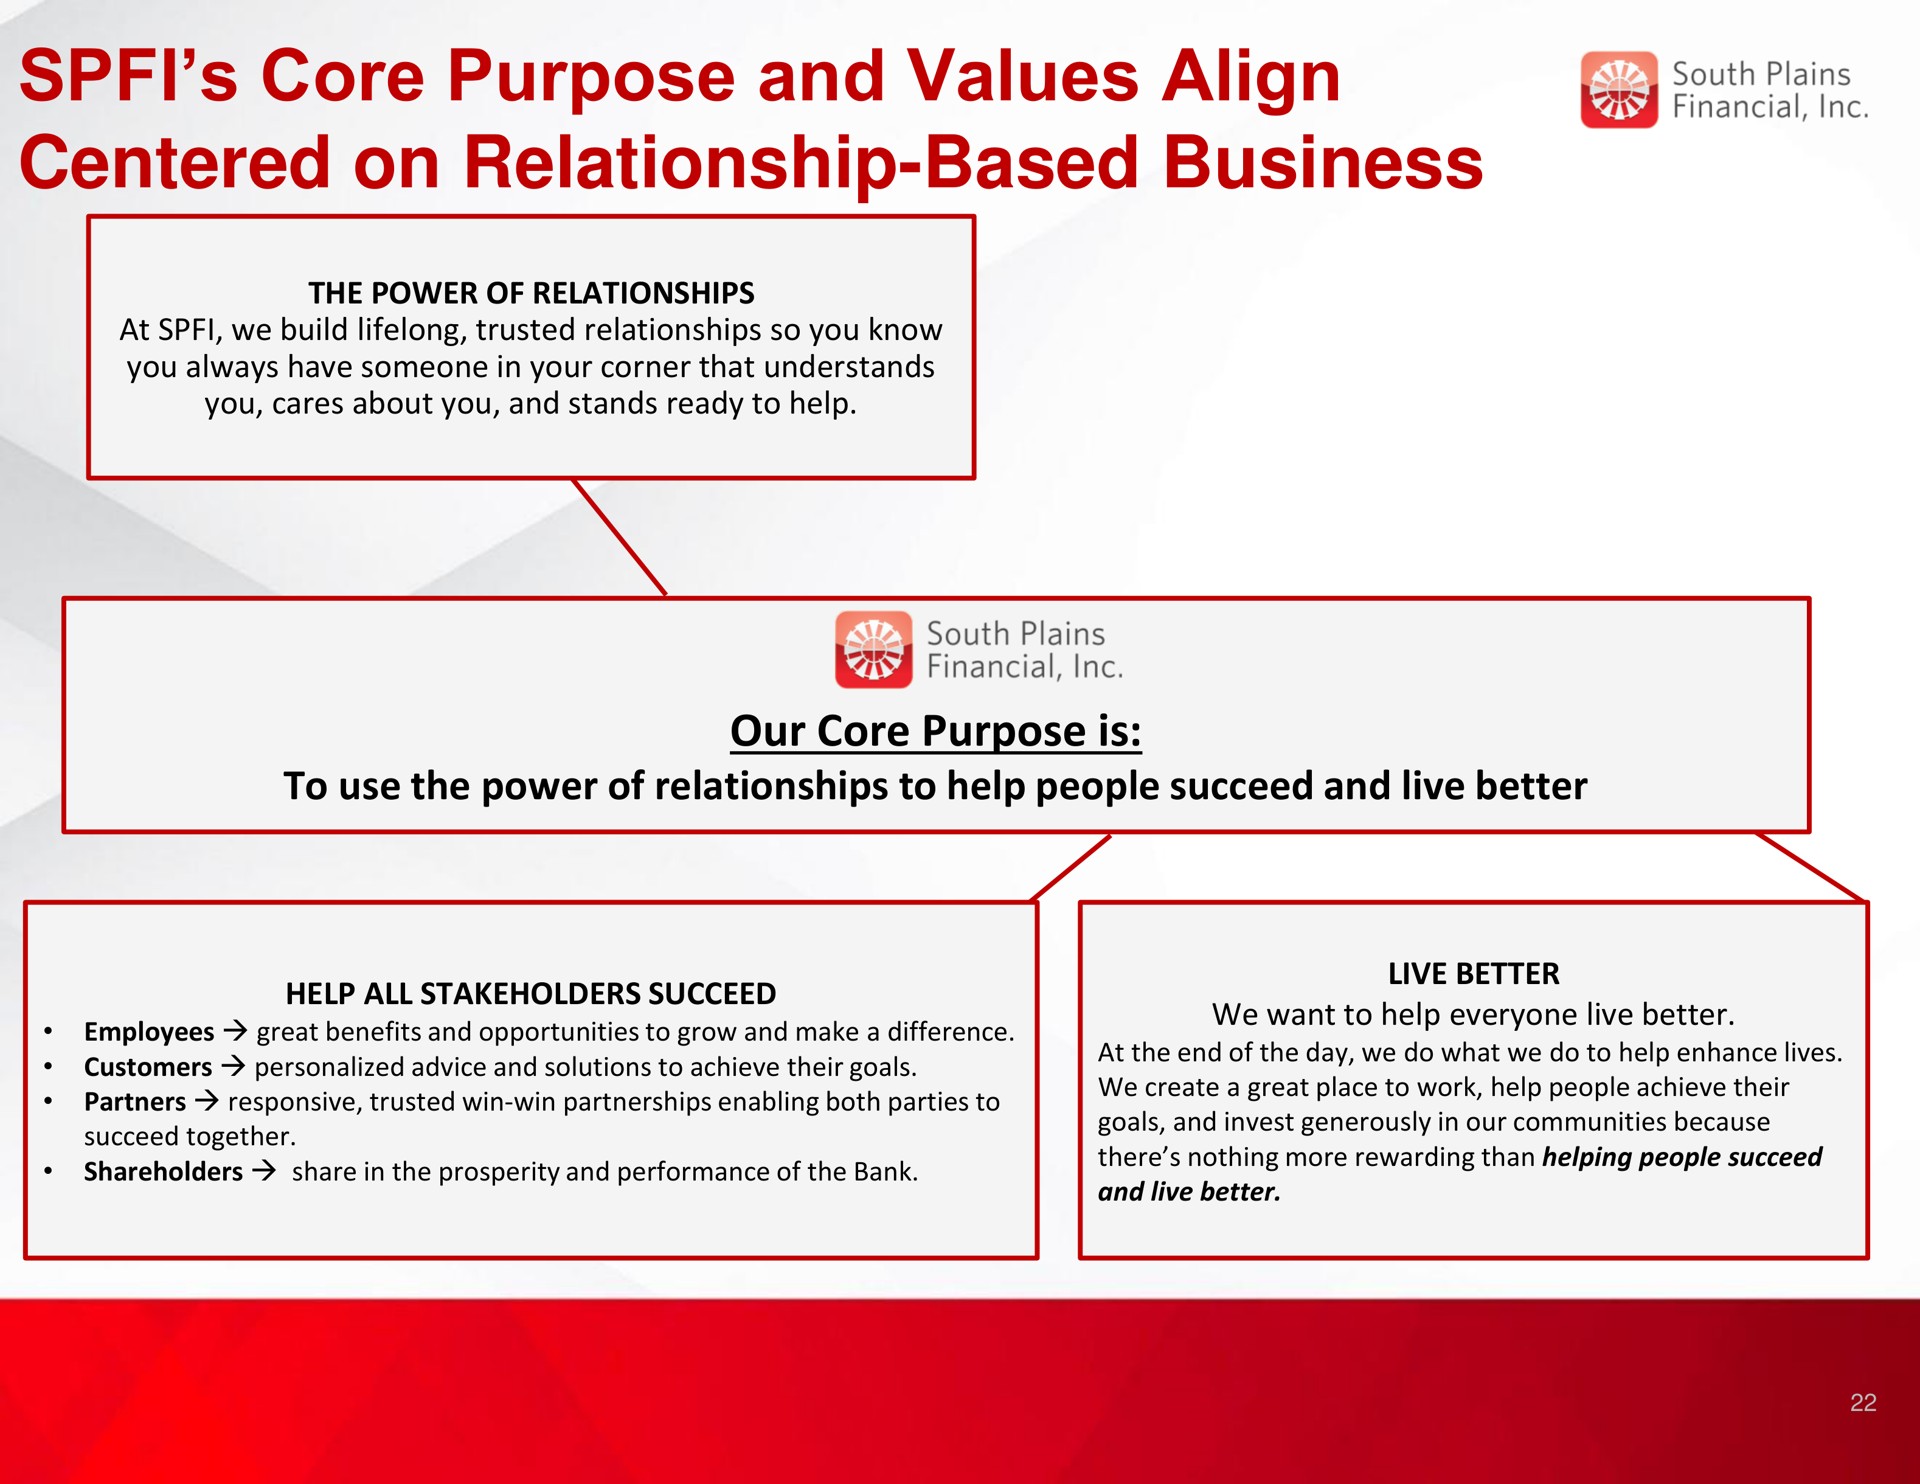 core purpose and values align centered on relationship based business sey south plains | South Plains Financial